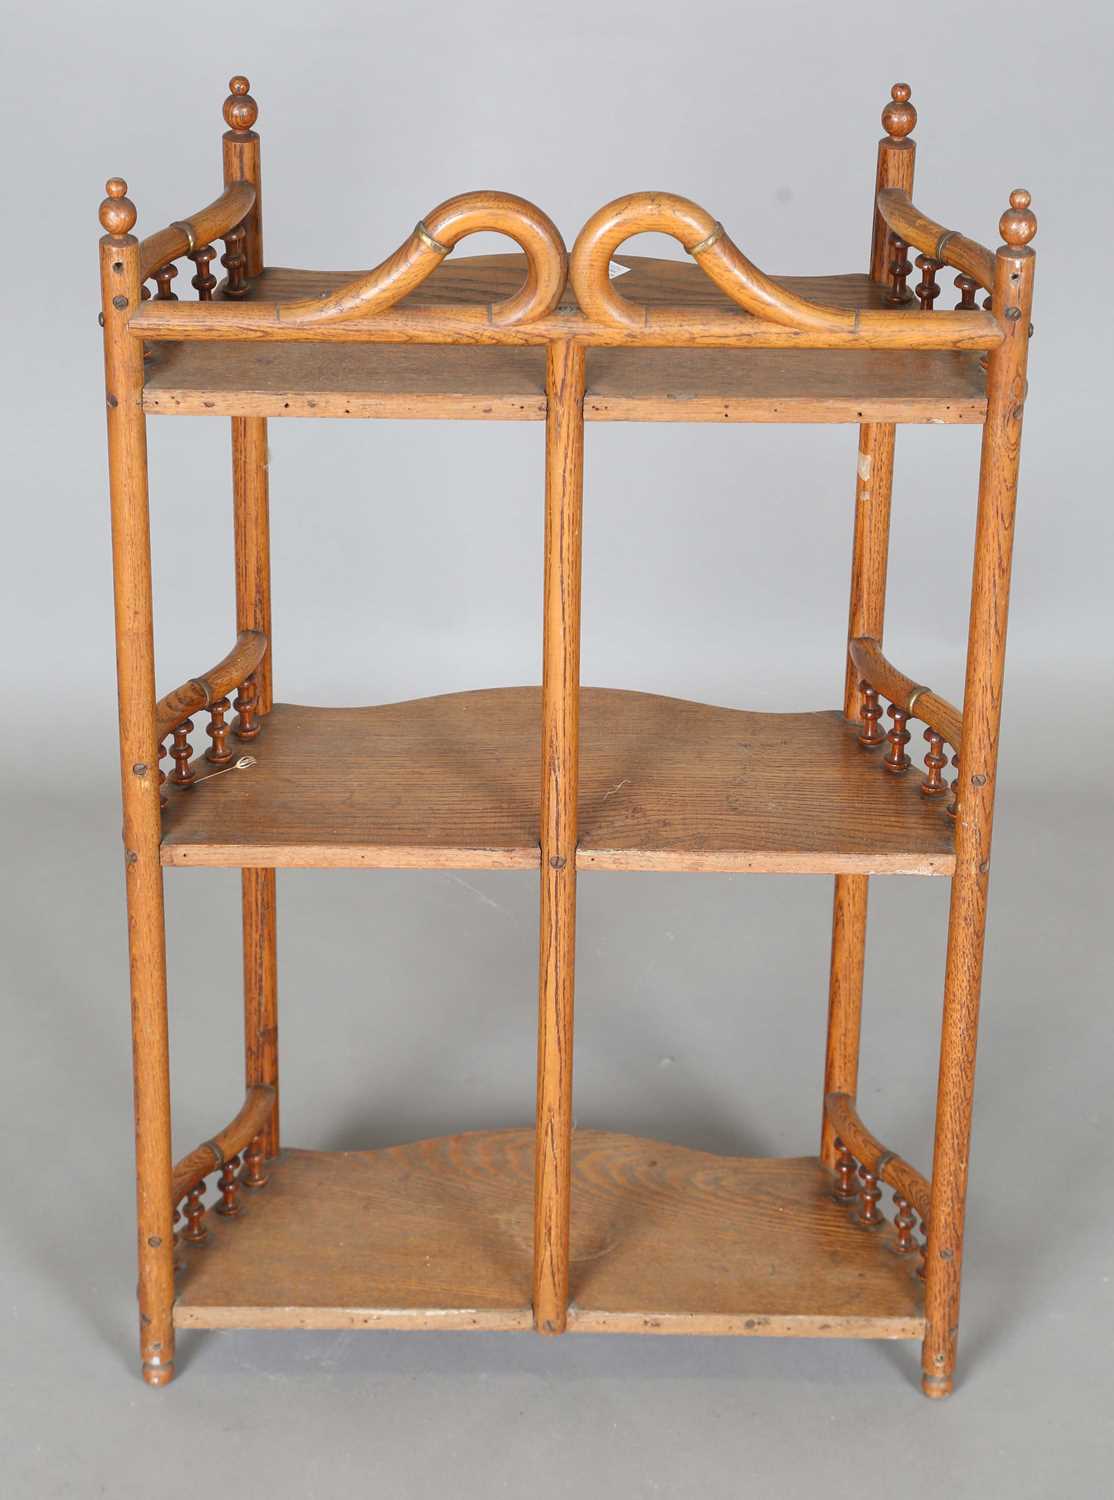 An early 20th century ash and bentwood three-tier wall shelf with applied gilt metal mounts, - Image 6 of 7